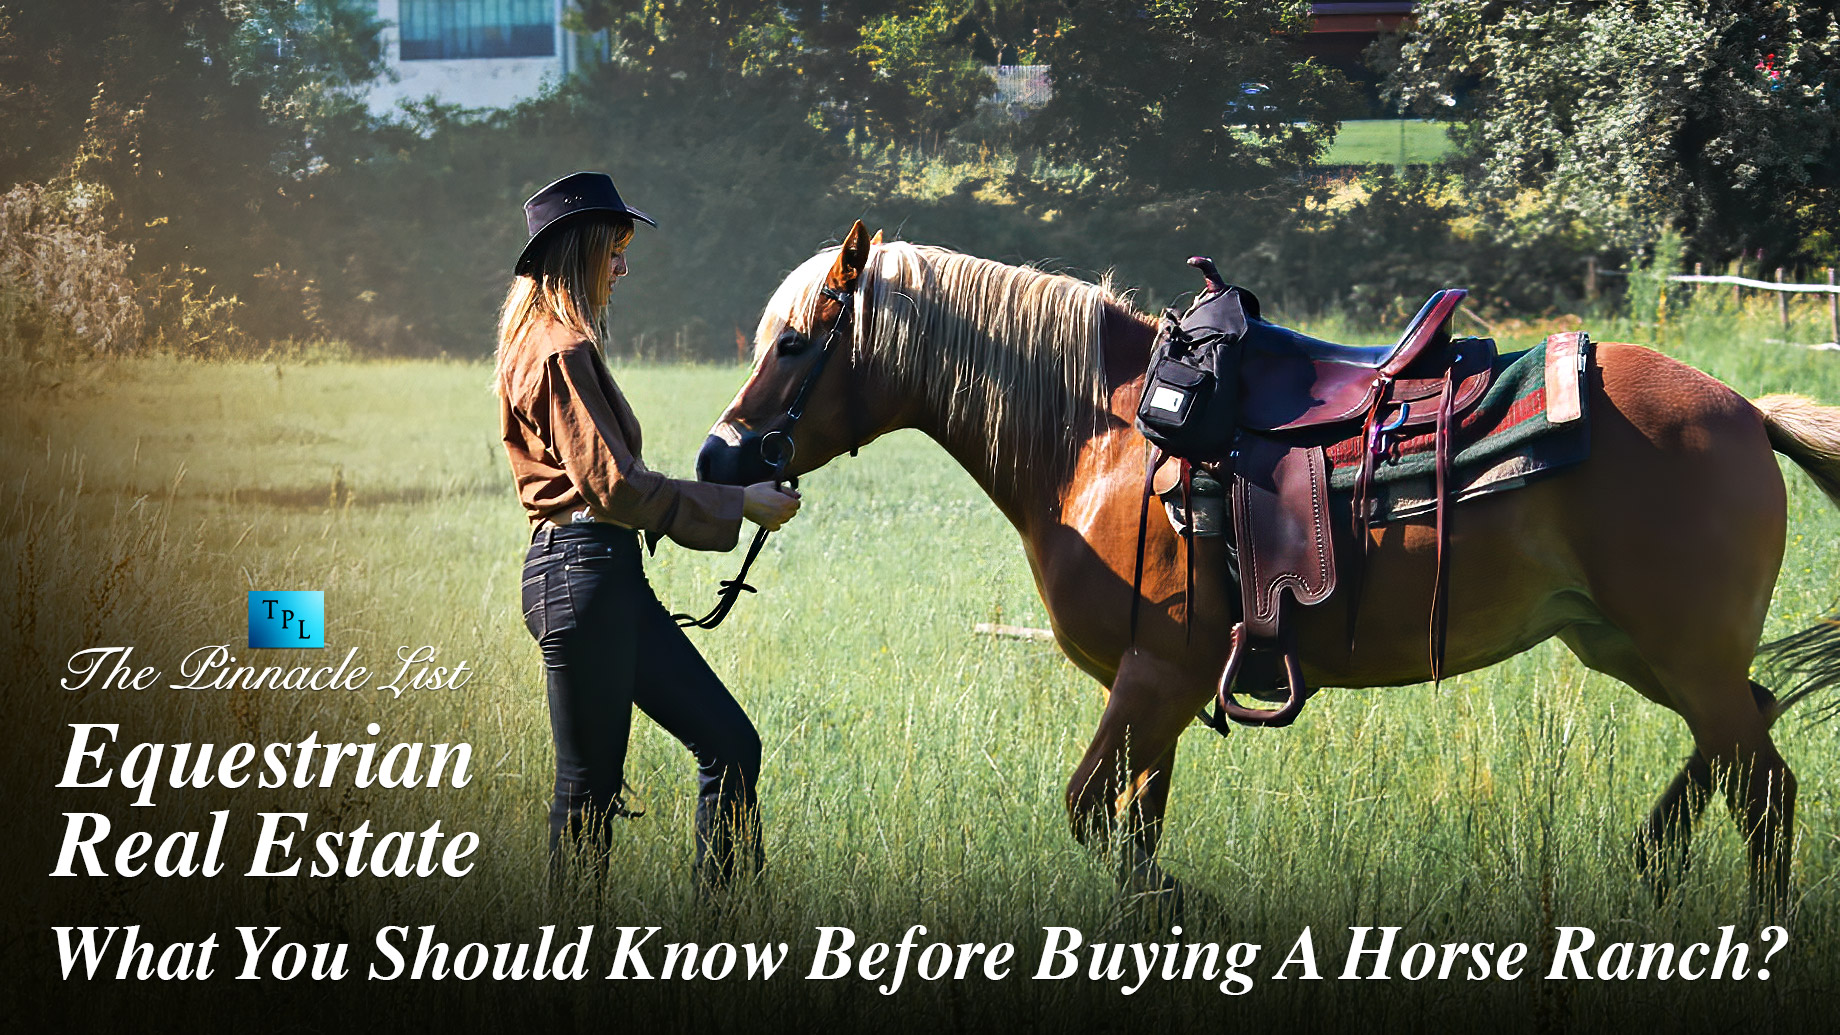 Equestrian Real Estate: What You Should Know Before Buying A Horse Ranch?